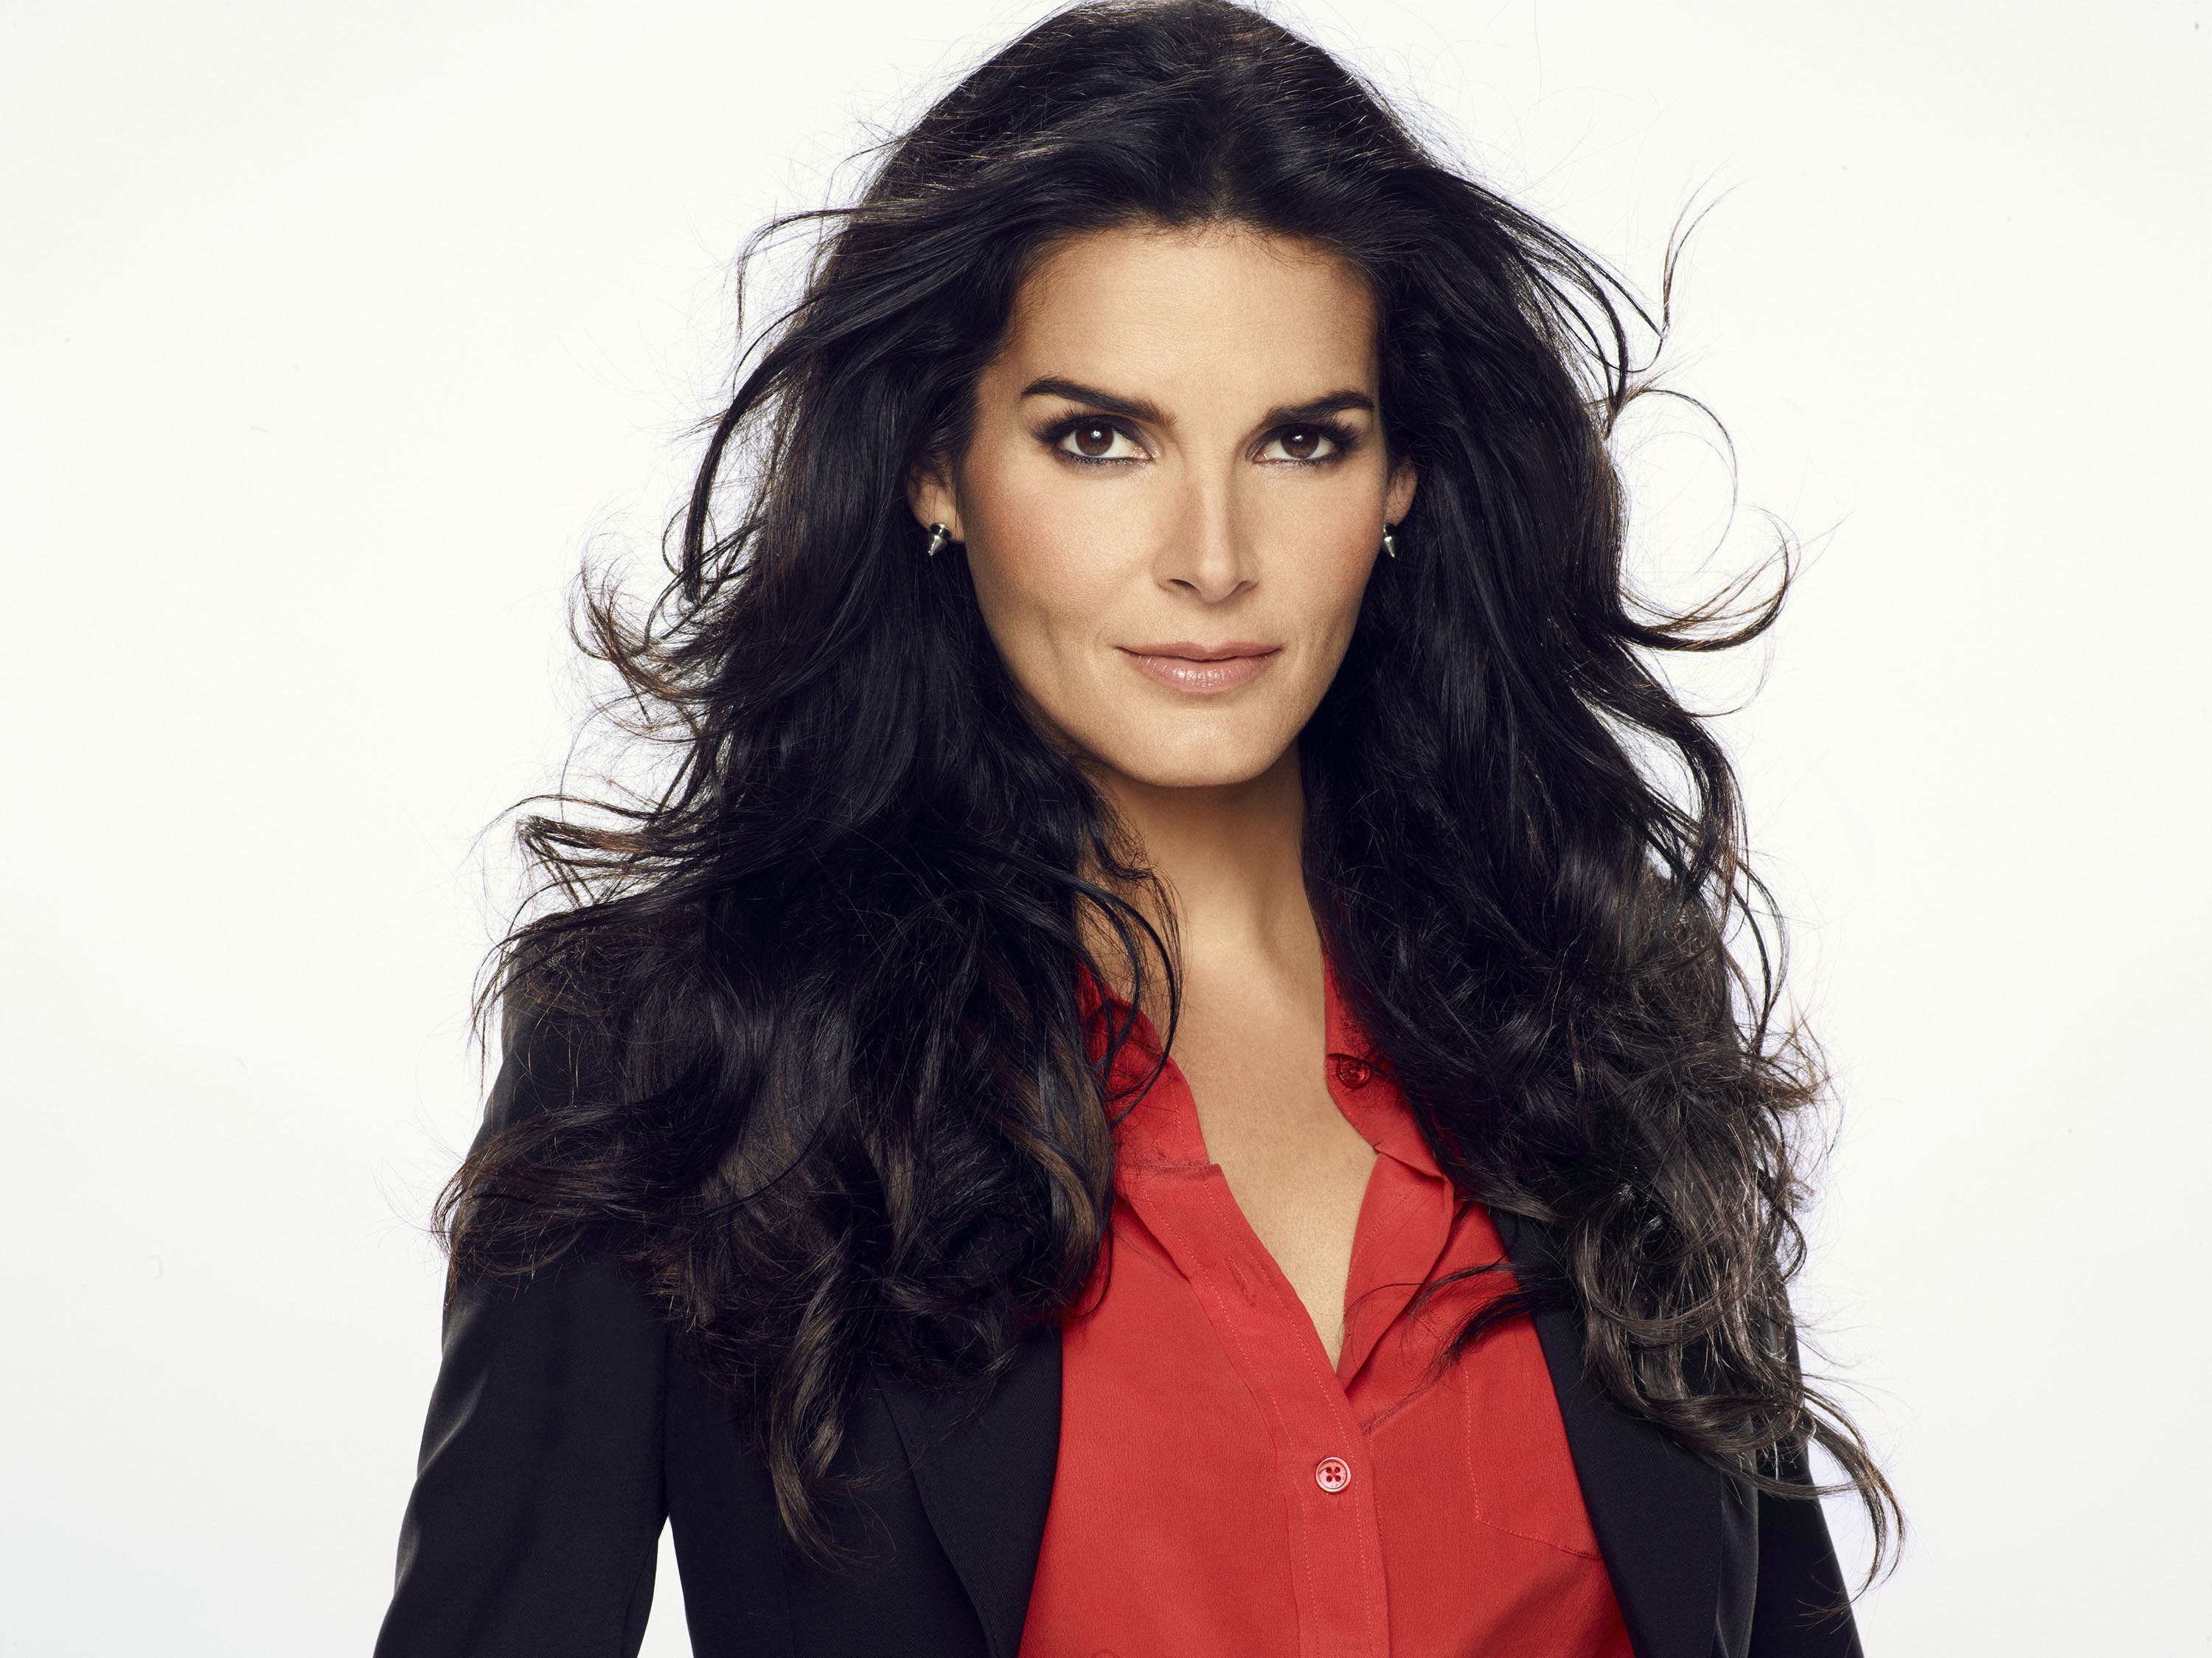 Angie Harmon HD Wallpaper Background Image 3000x2248 ID1034687.